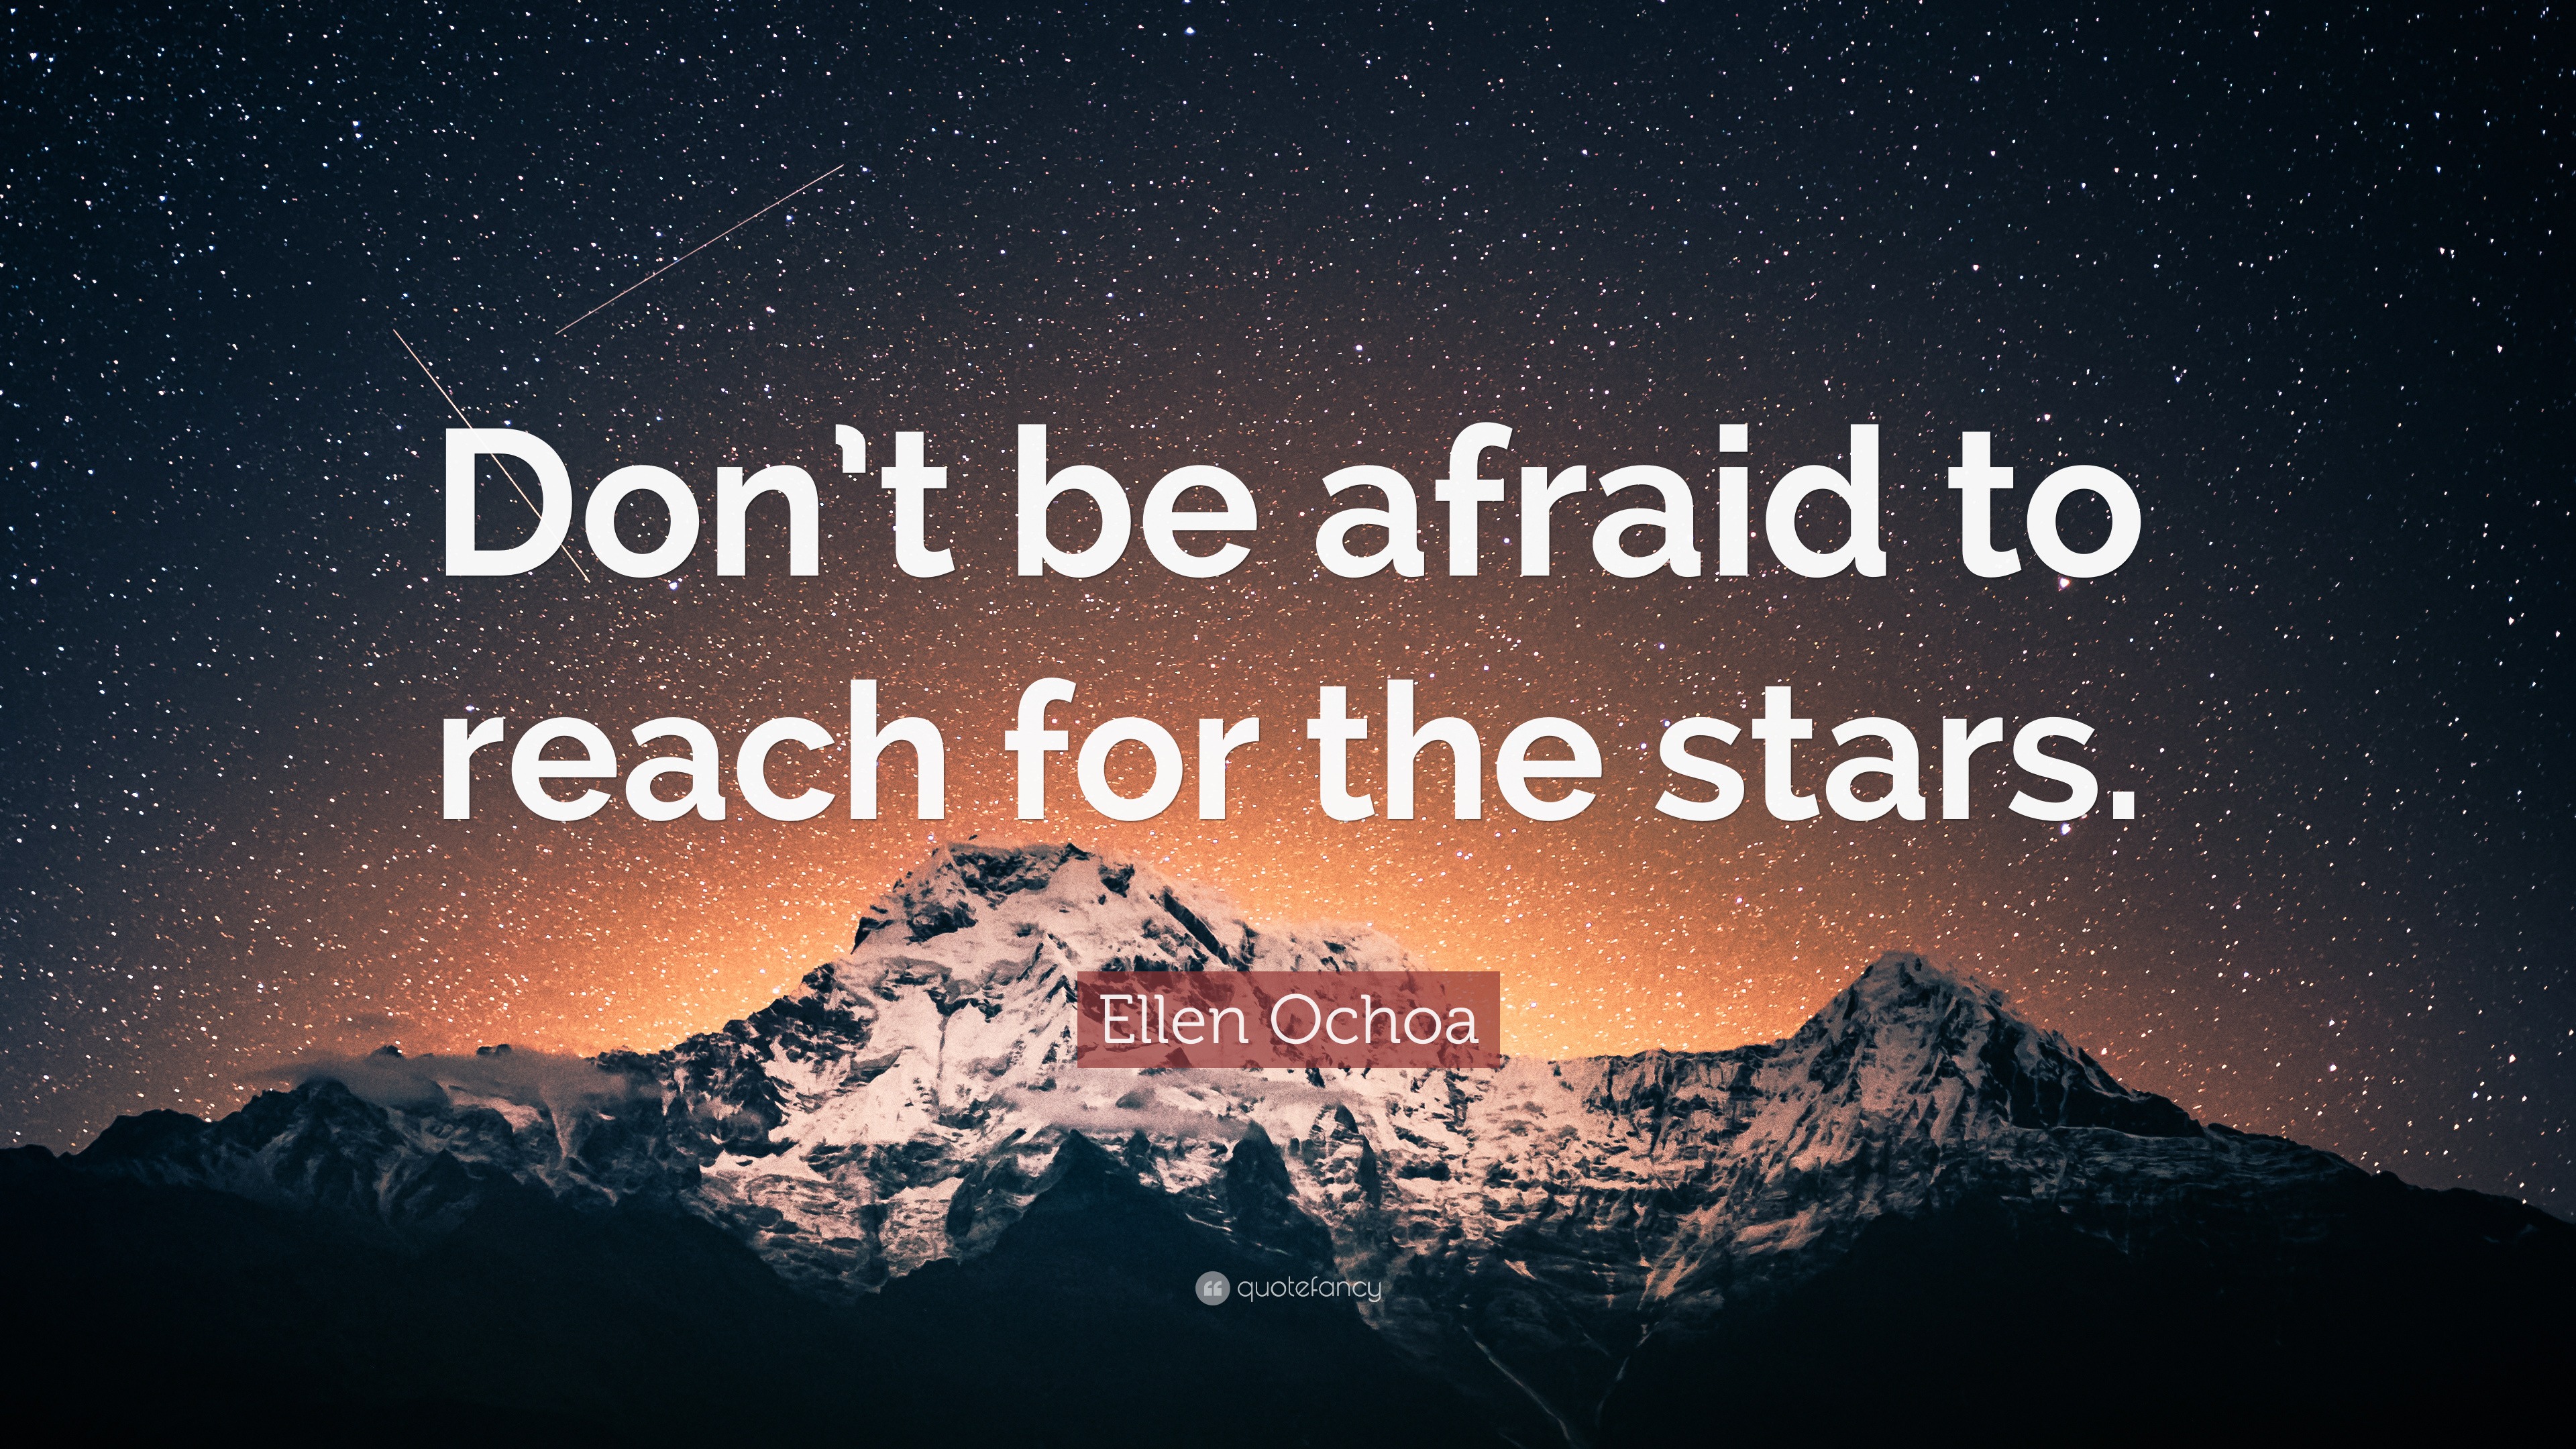 Ellen Ochoa Quote: "Don't be afraid to reach for the stars." (12 wallpapers) - Quotefancy